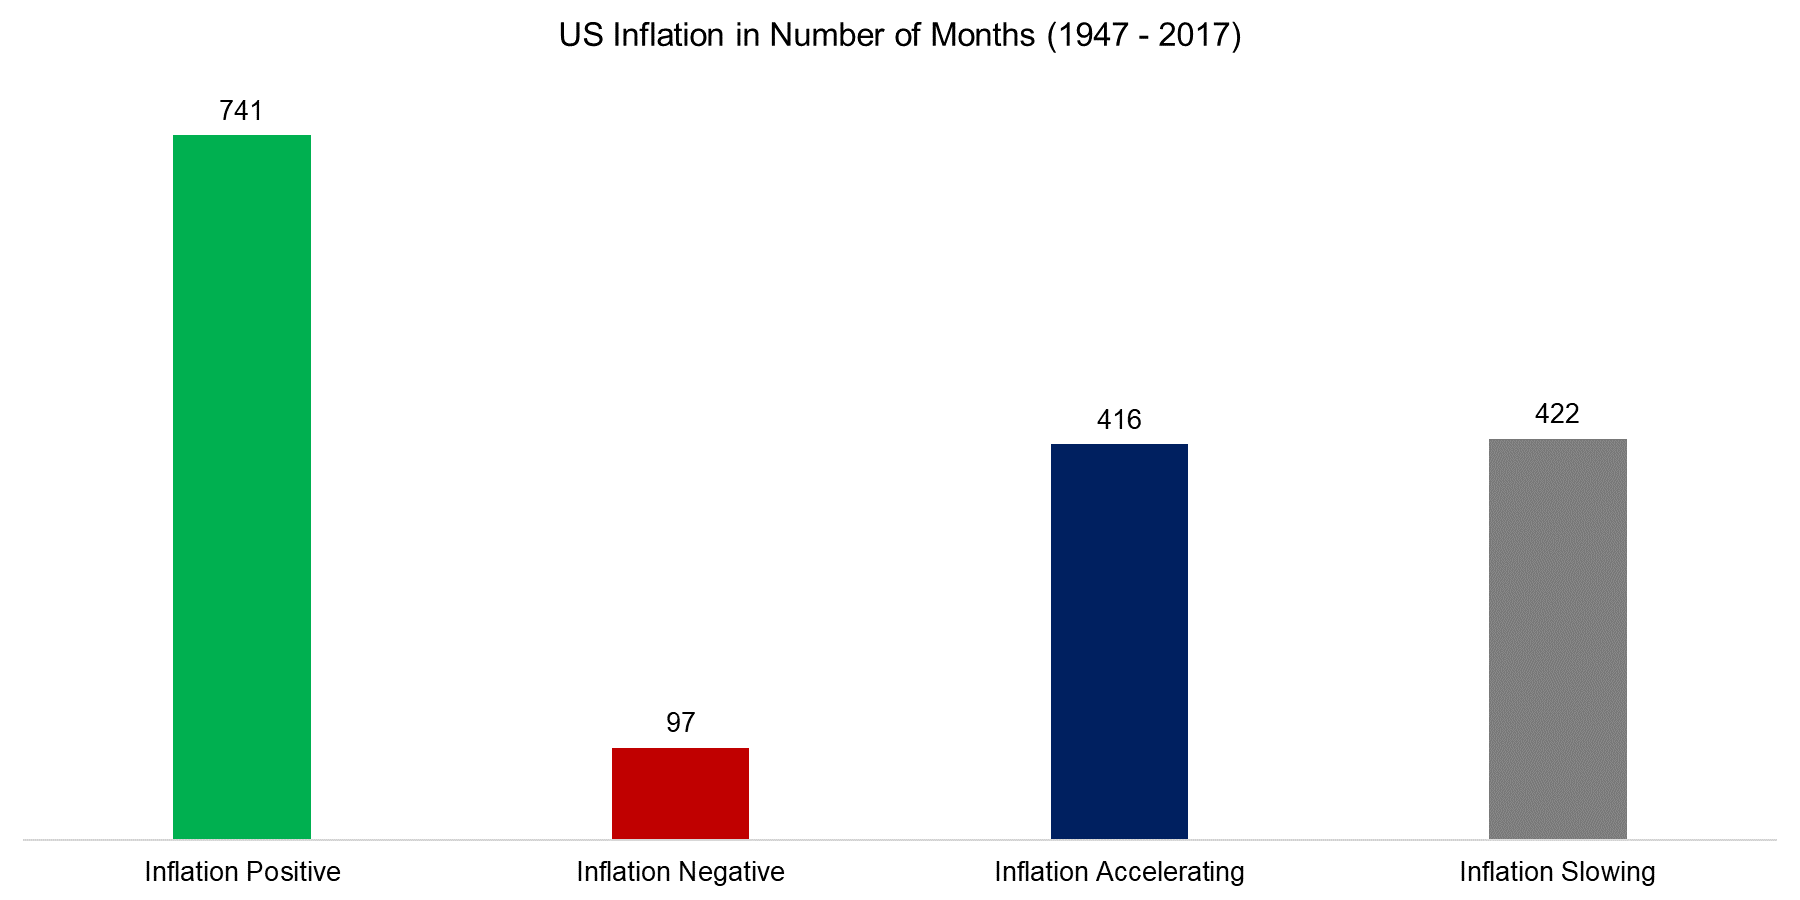 US Inflation in Number of Months (1947 - 2017)